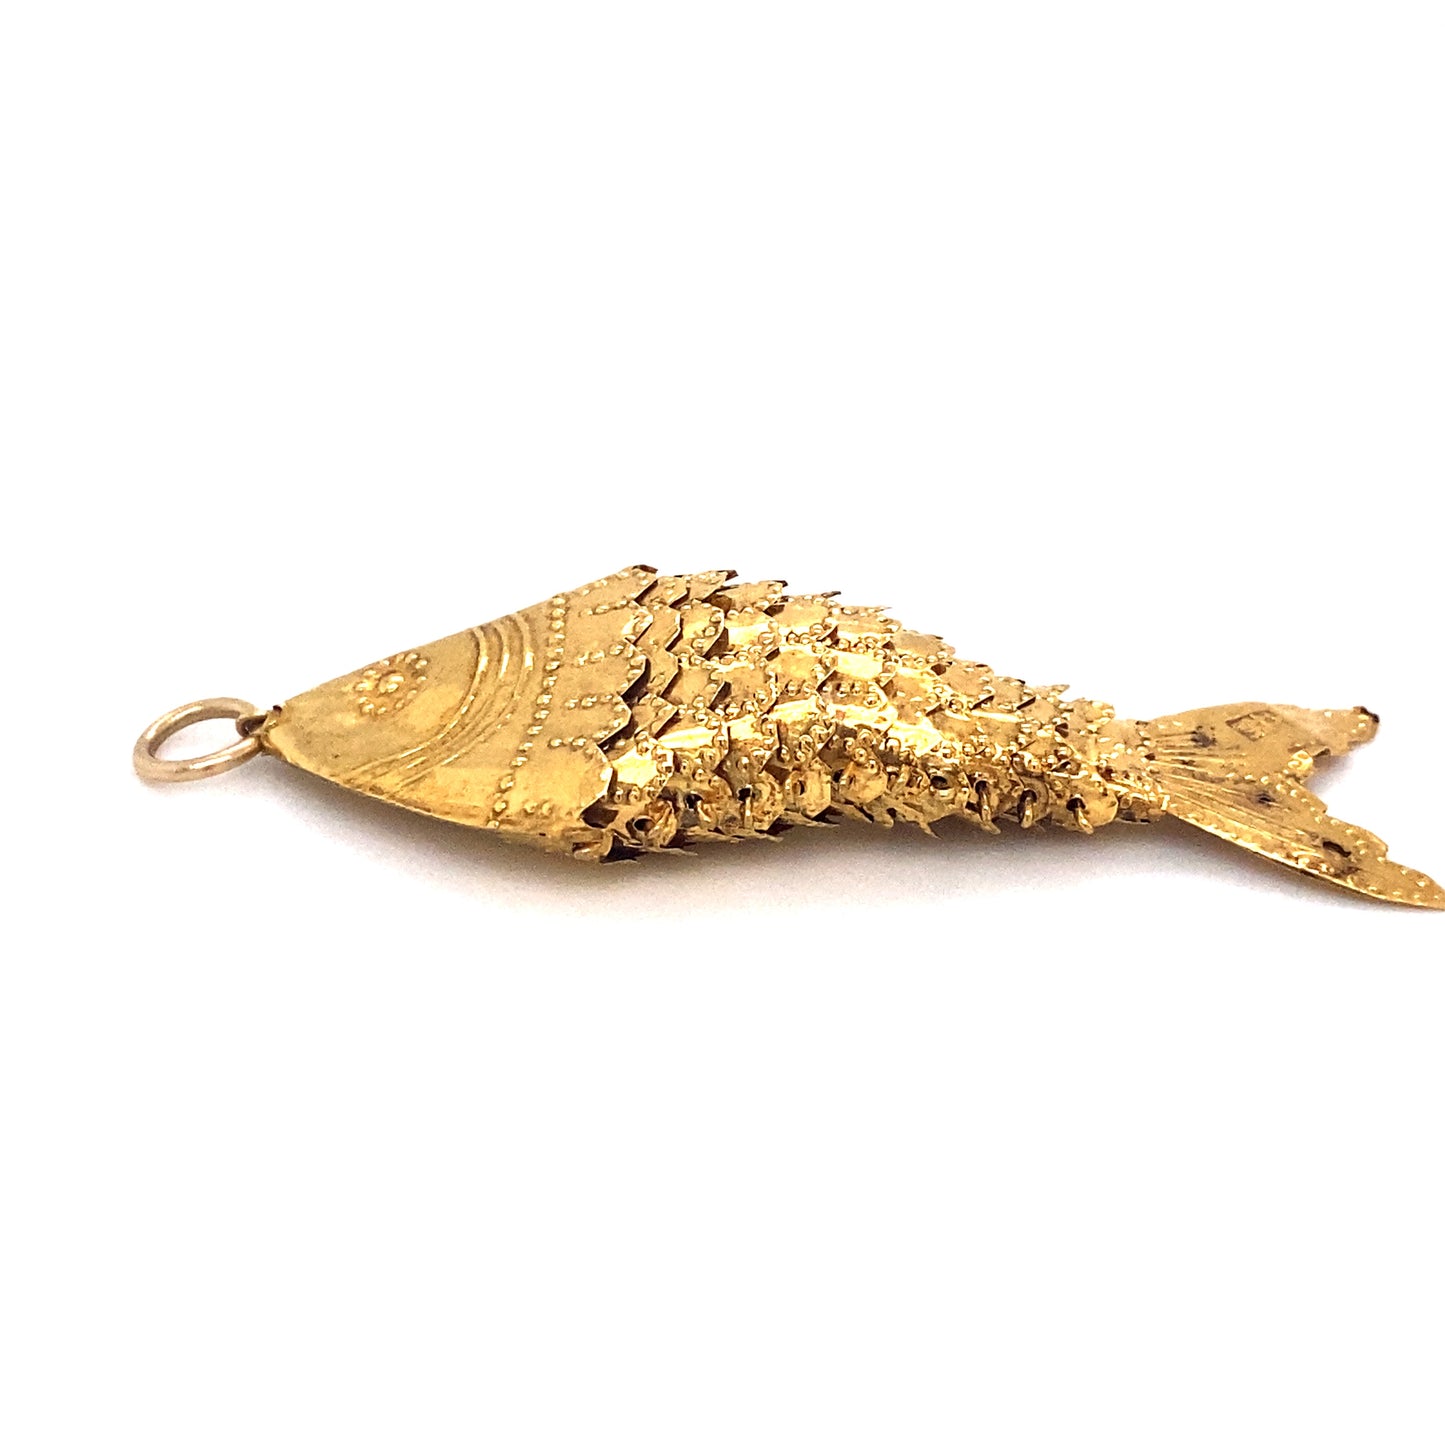 Circa 1980s Chinese Articulated Fish Pendant in 18K Gold